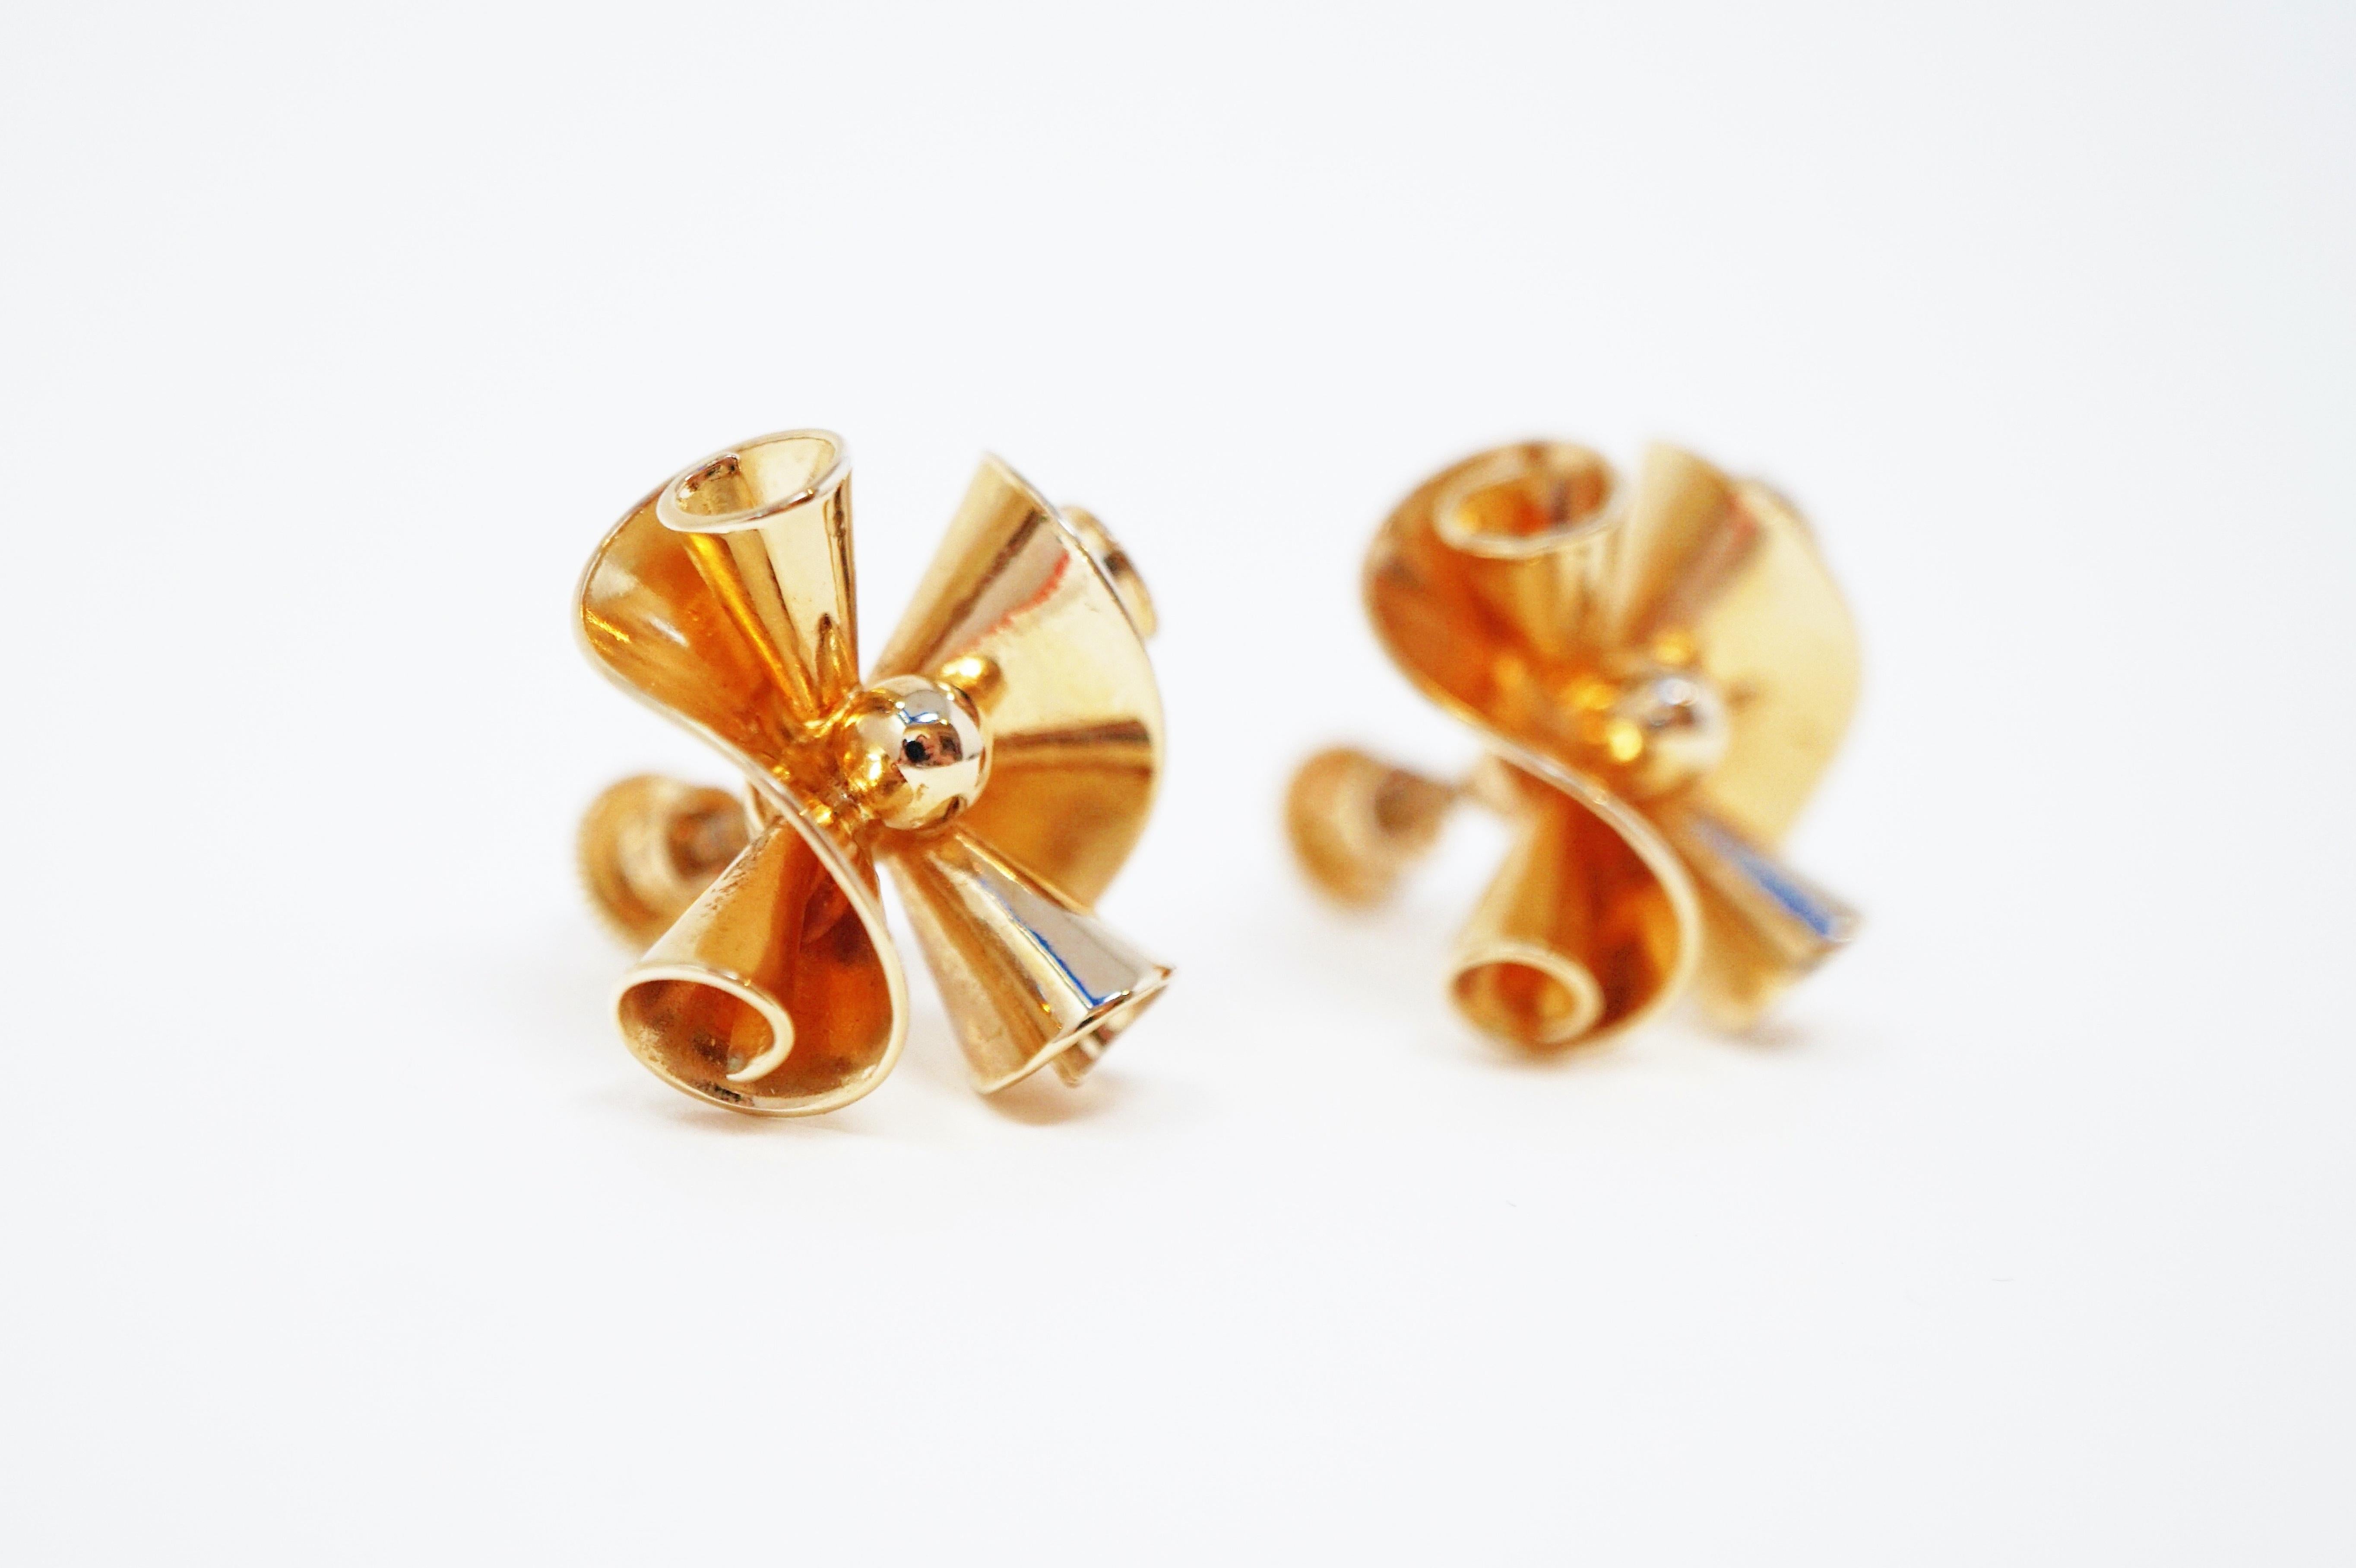 These vintage gilded scroll earrings by Barclay, circa 1950, are perfect for adding a touch of gorgeous golden shine to your look!  Great for holiday ensembles, evening outfits and other sophisticated styles.

ABOUT BARCLAY:
Barclay Jewelry Inc. was